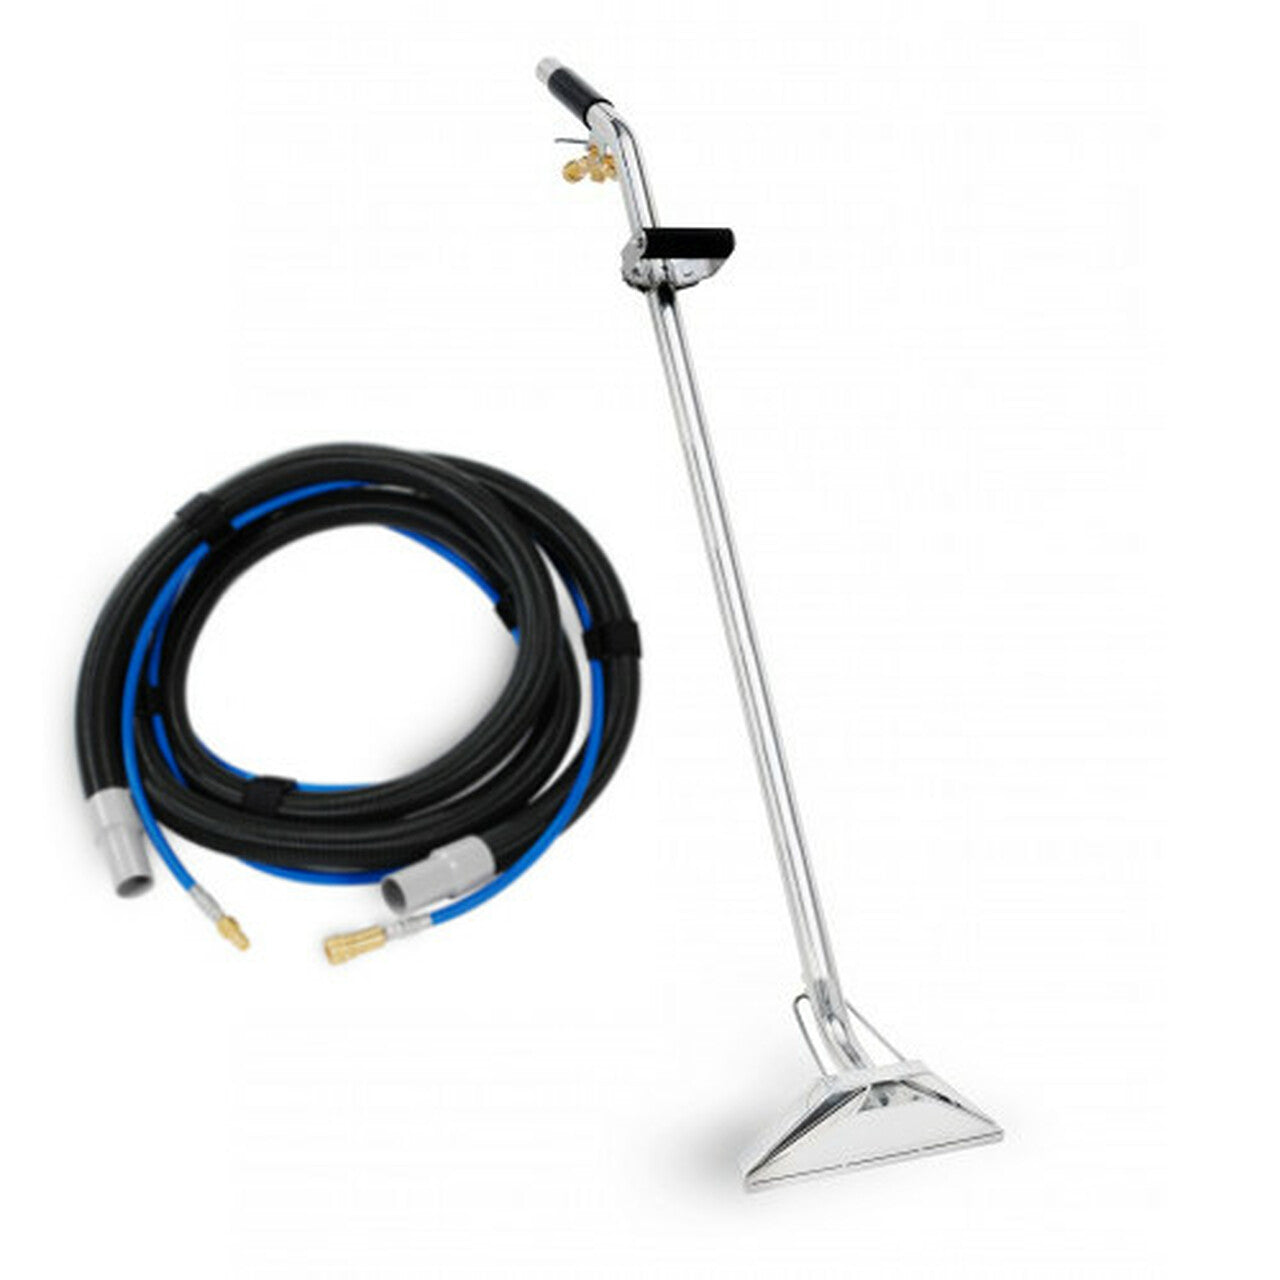 10" single jet carpet cleaning wand with 15ft hose assembly